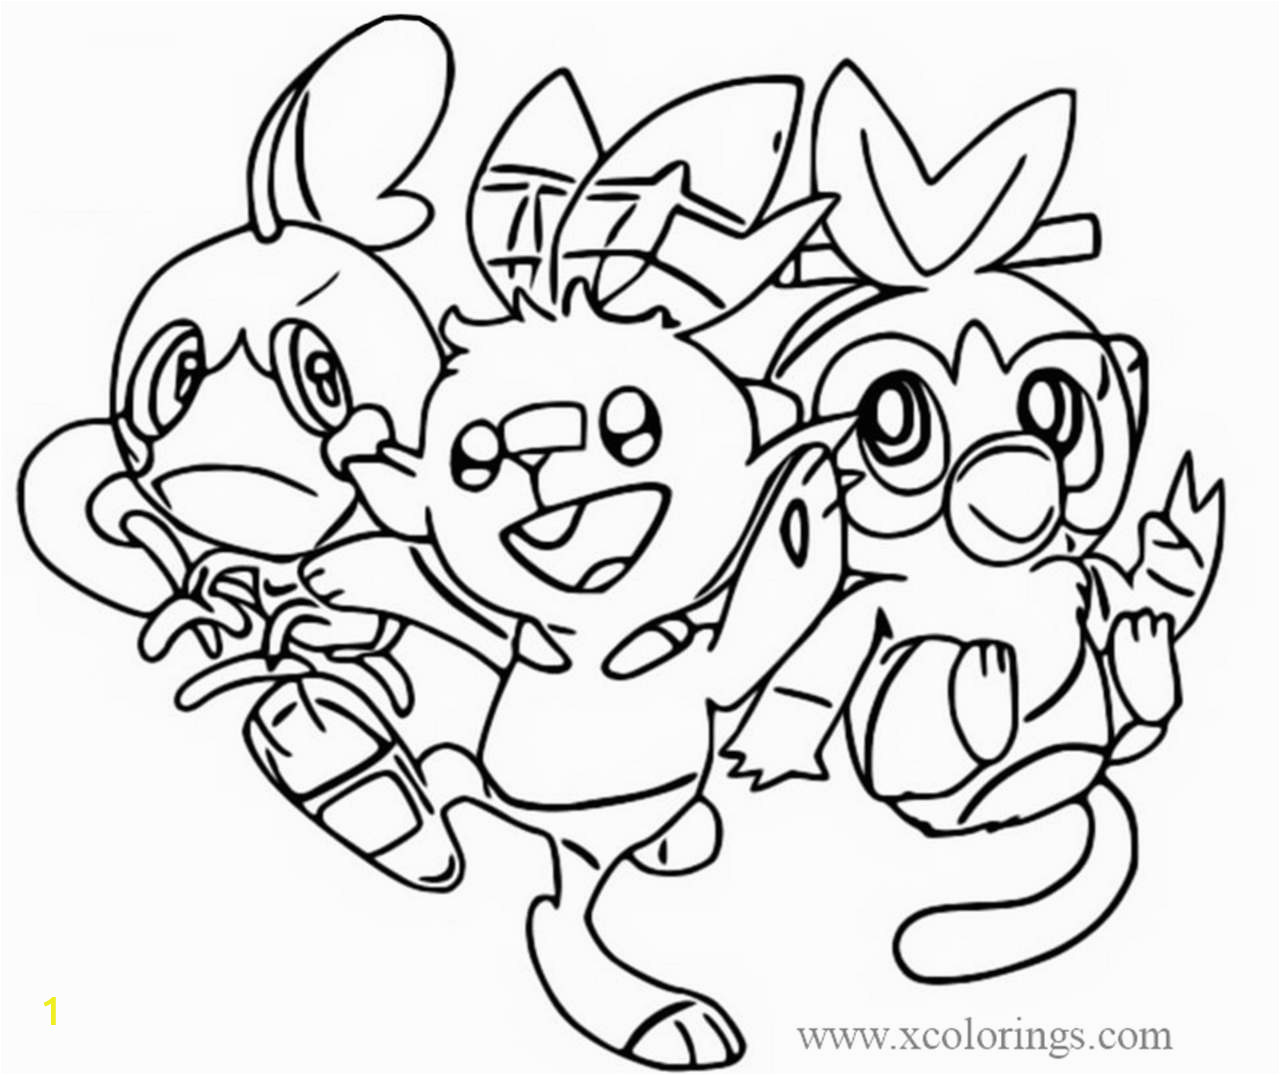 Pokemon Coloring Pages Sword and Shield Pokemon Sword and Shield Coloring Pages Archives Xcolorings